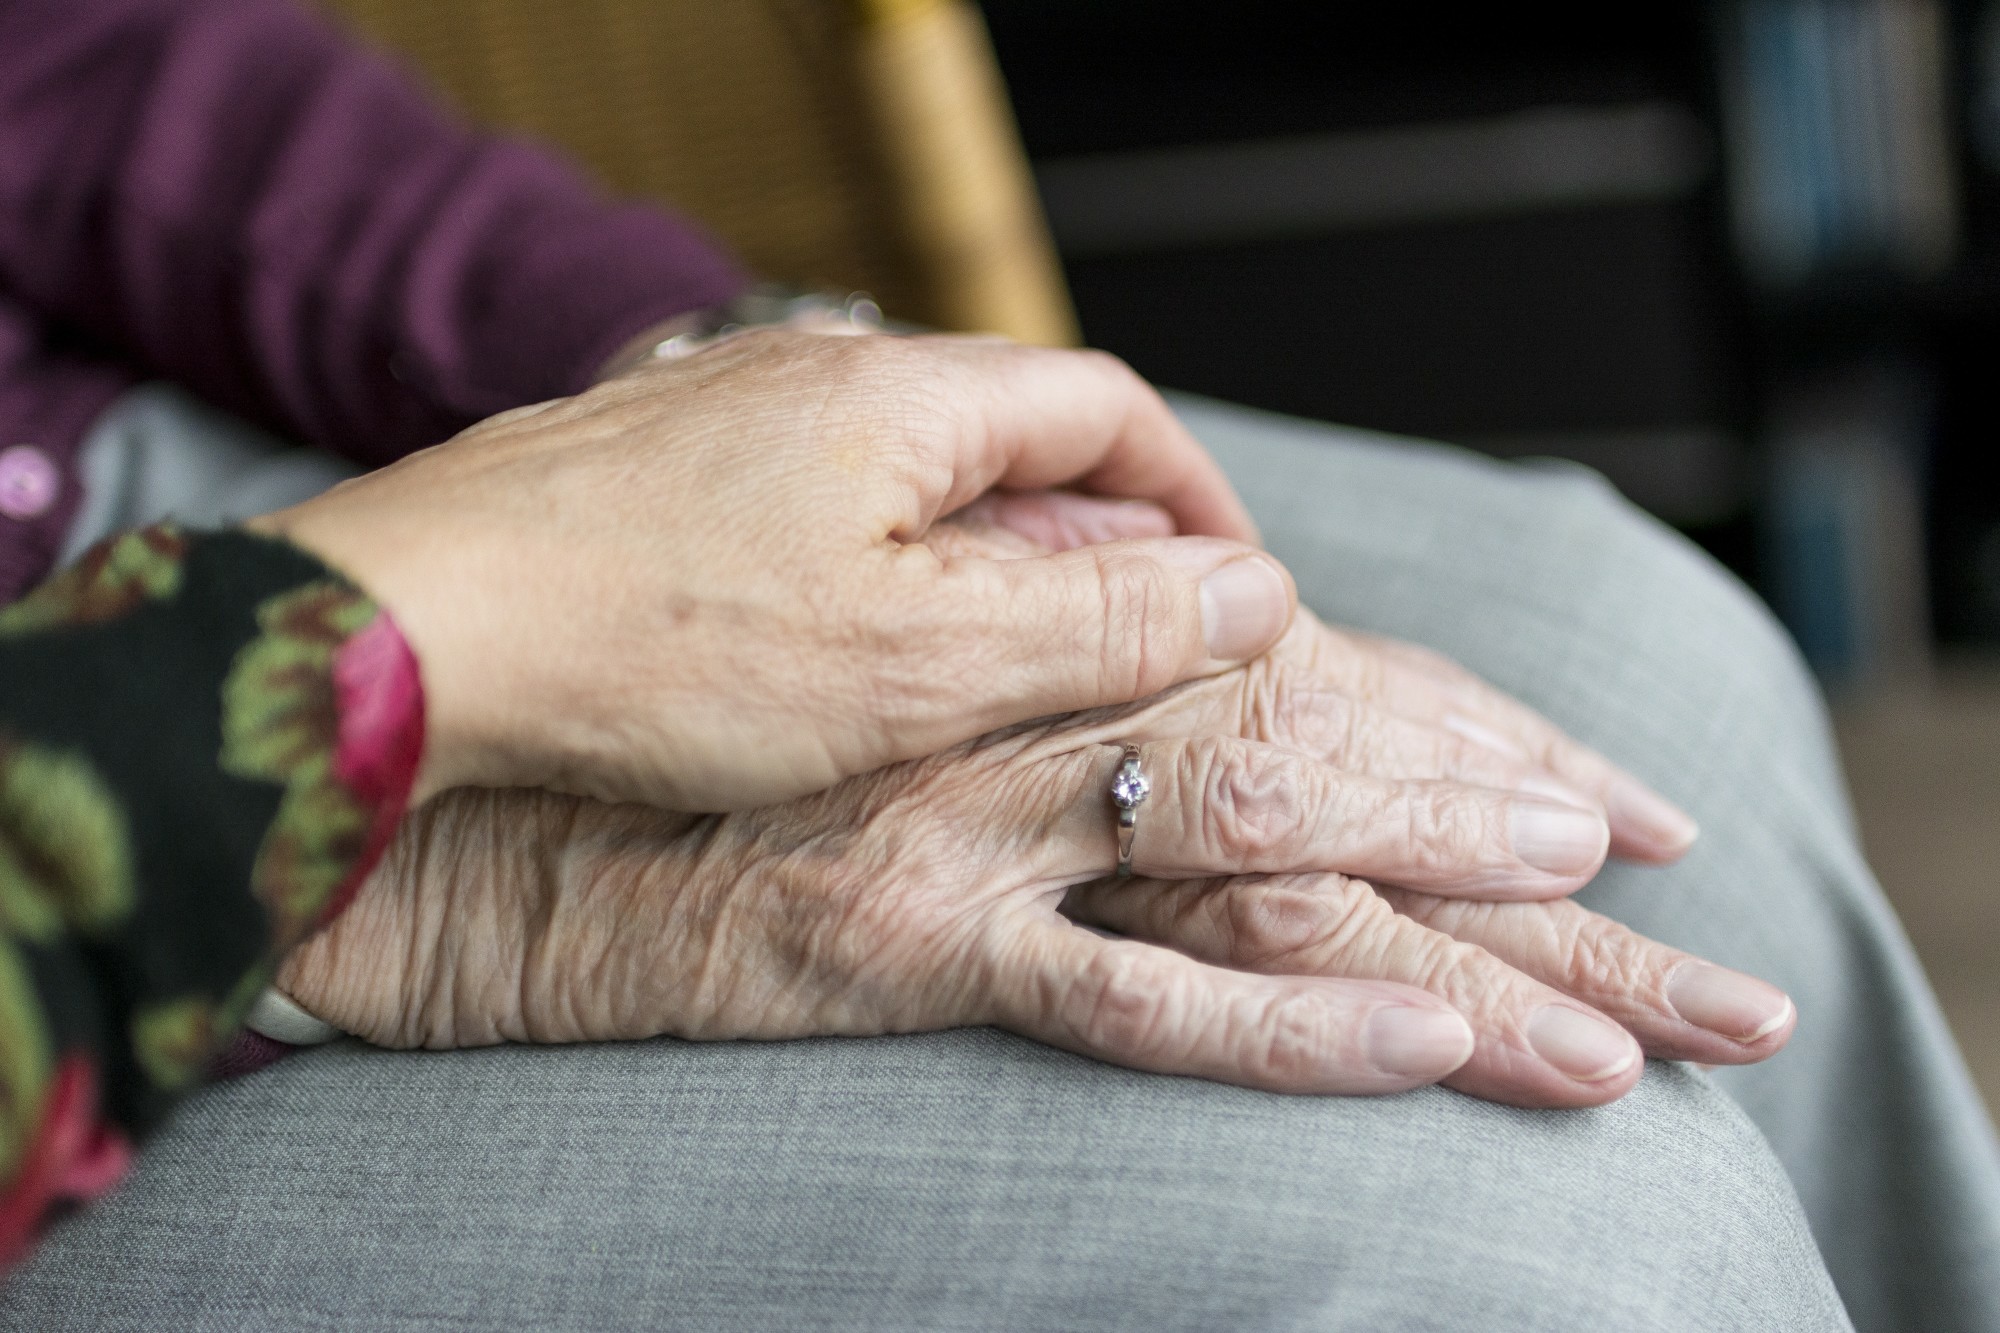 5 In-Home Elderly Services That Will Boost Quality of Life